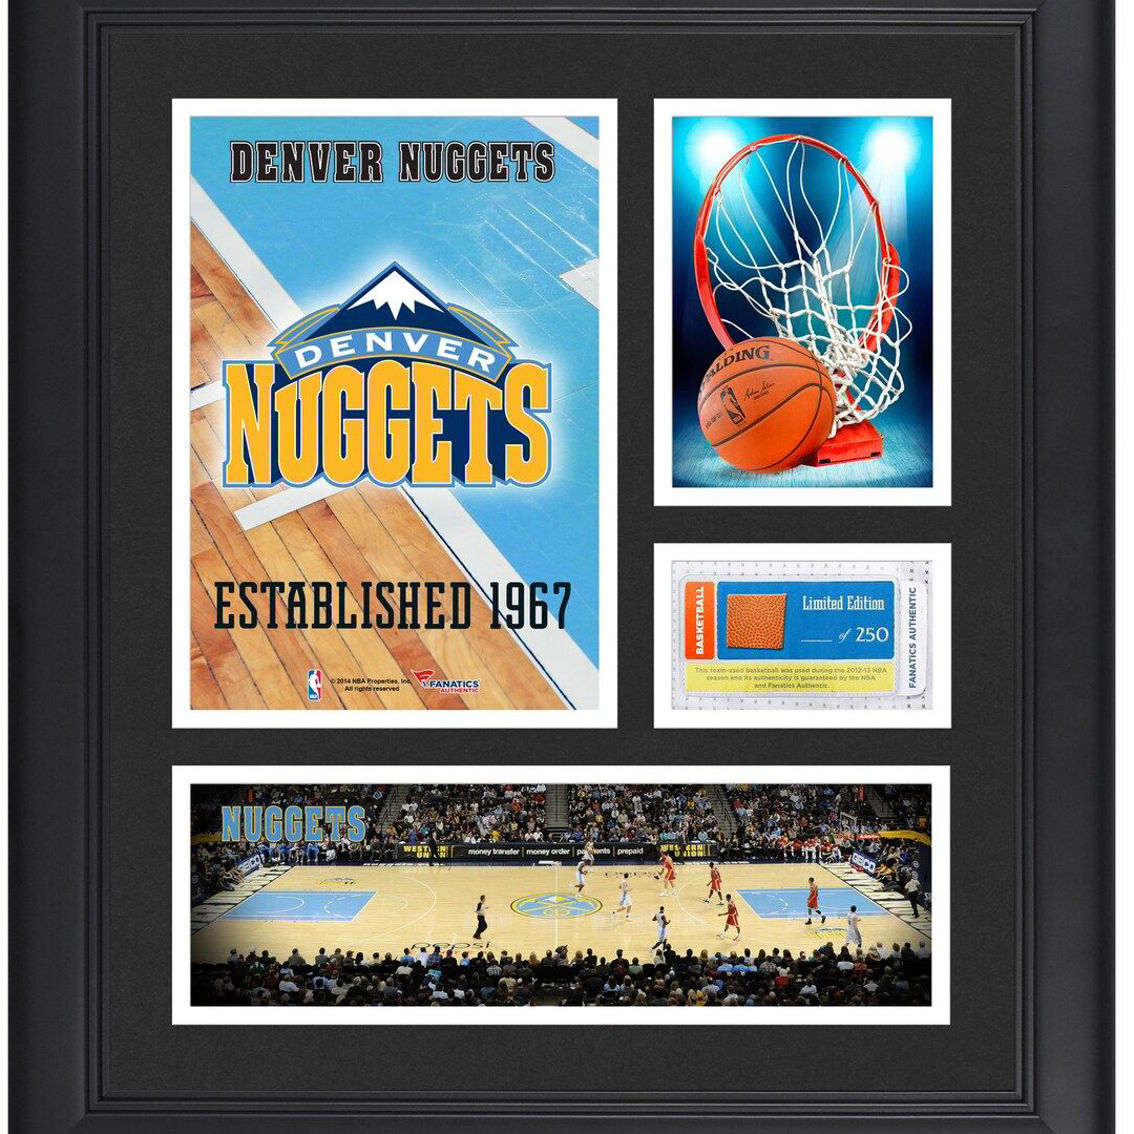 Fanatics Authentic Denver Nuggets Framed 15'' x 17'' Team Logo Collage with Team-Used Basketball - Limited Edition of 250